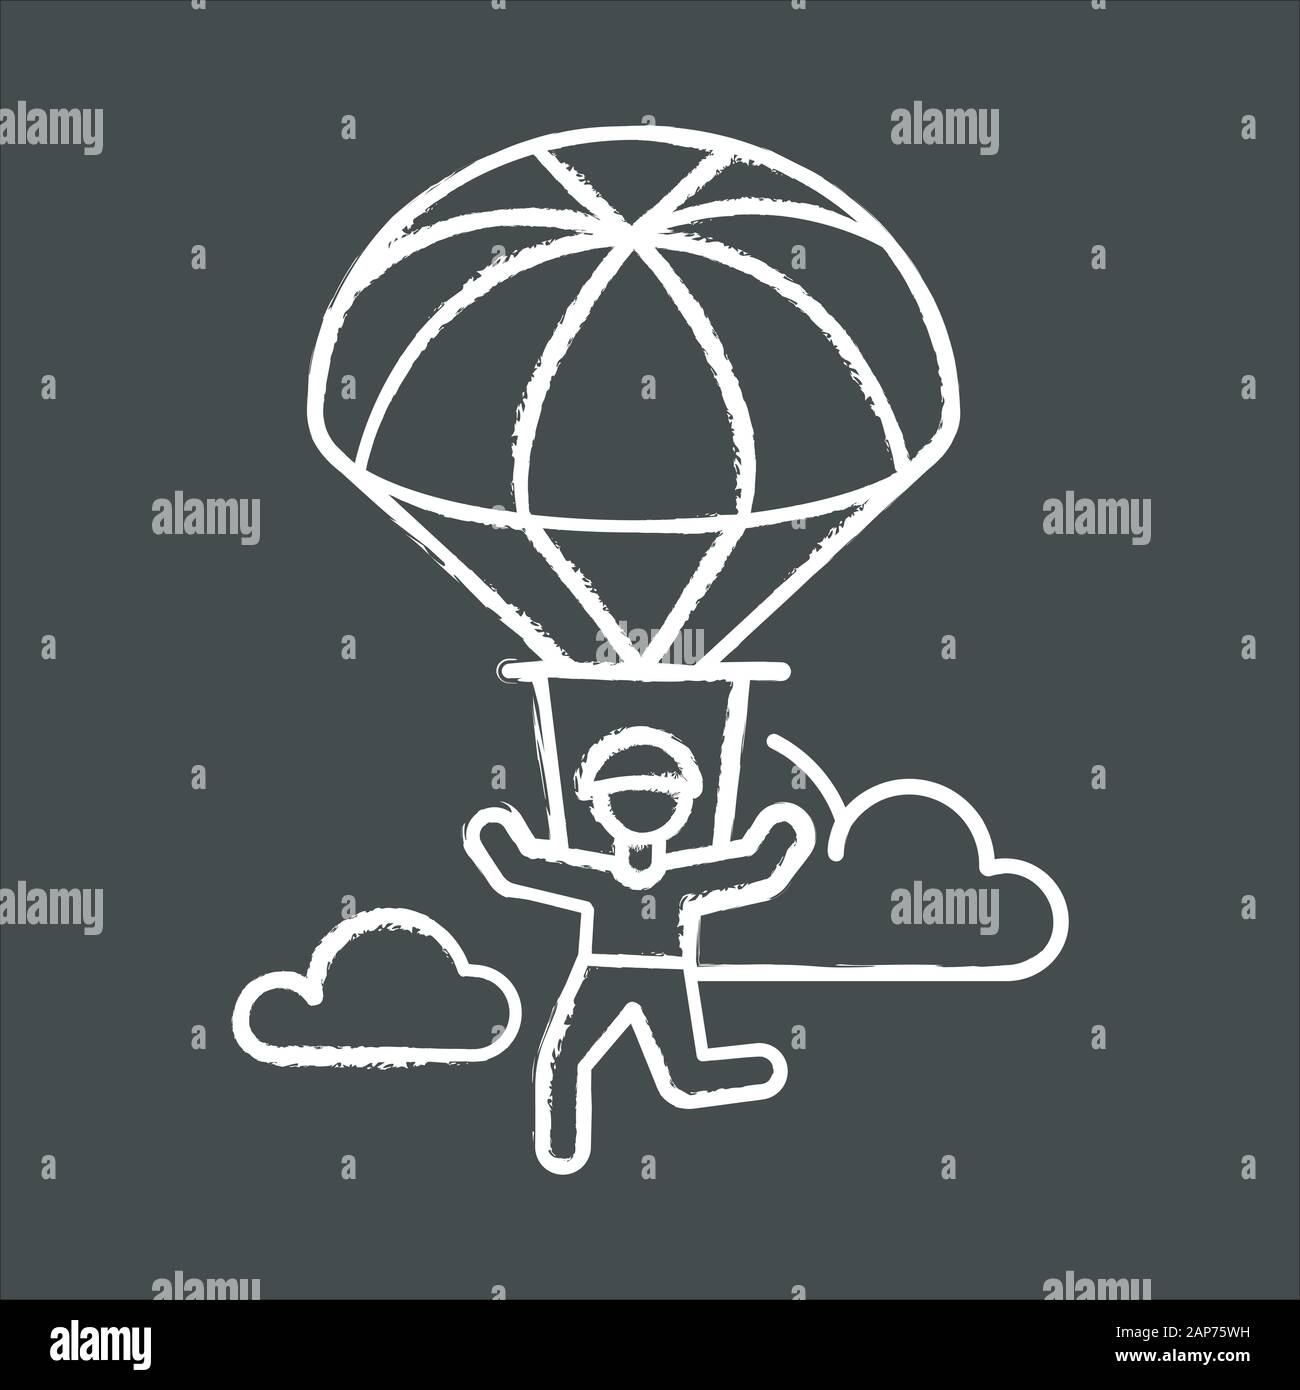 Parachuting chalk icon. Paragliding, paratrooping activity. Air extreme sport. Skydiving, hang gliding recreation. Flights in sky and jumps with parac Stock Vector